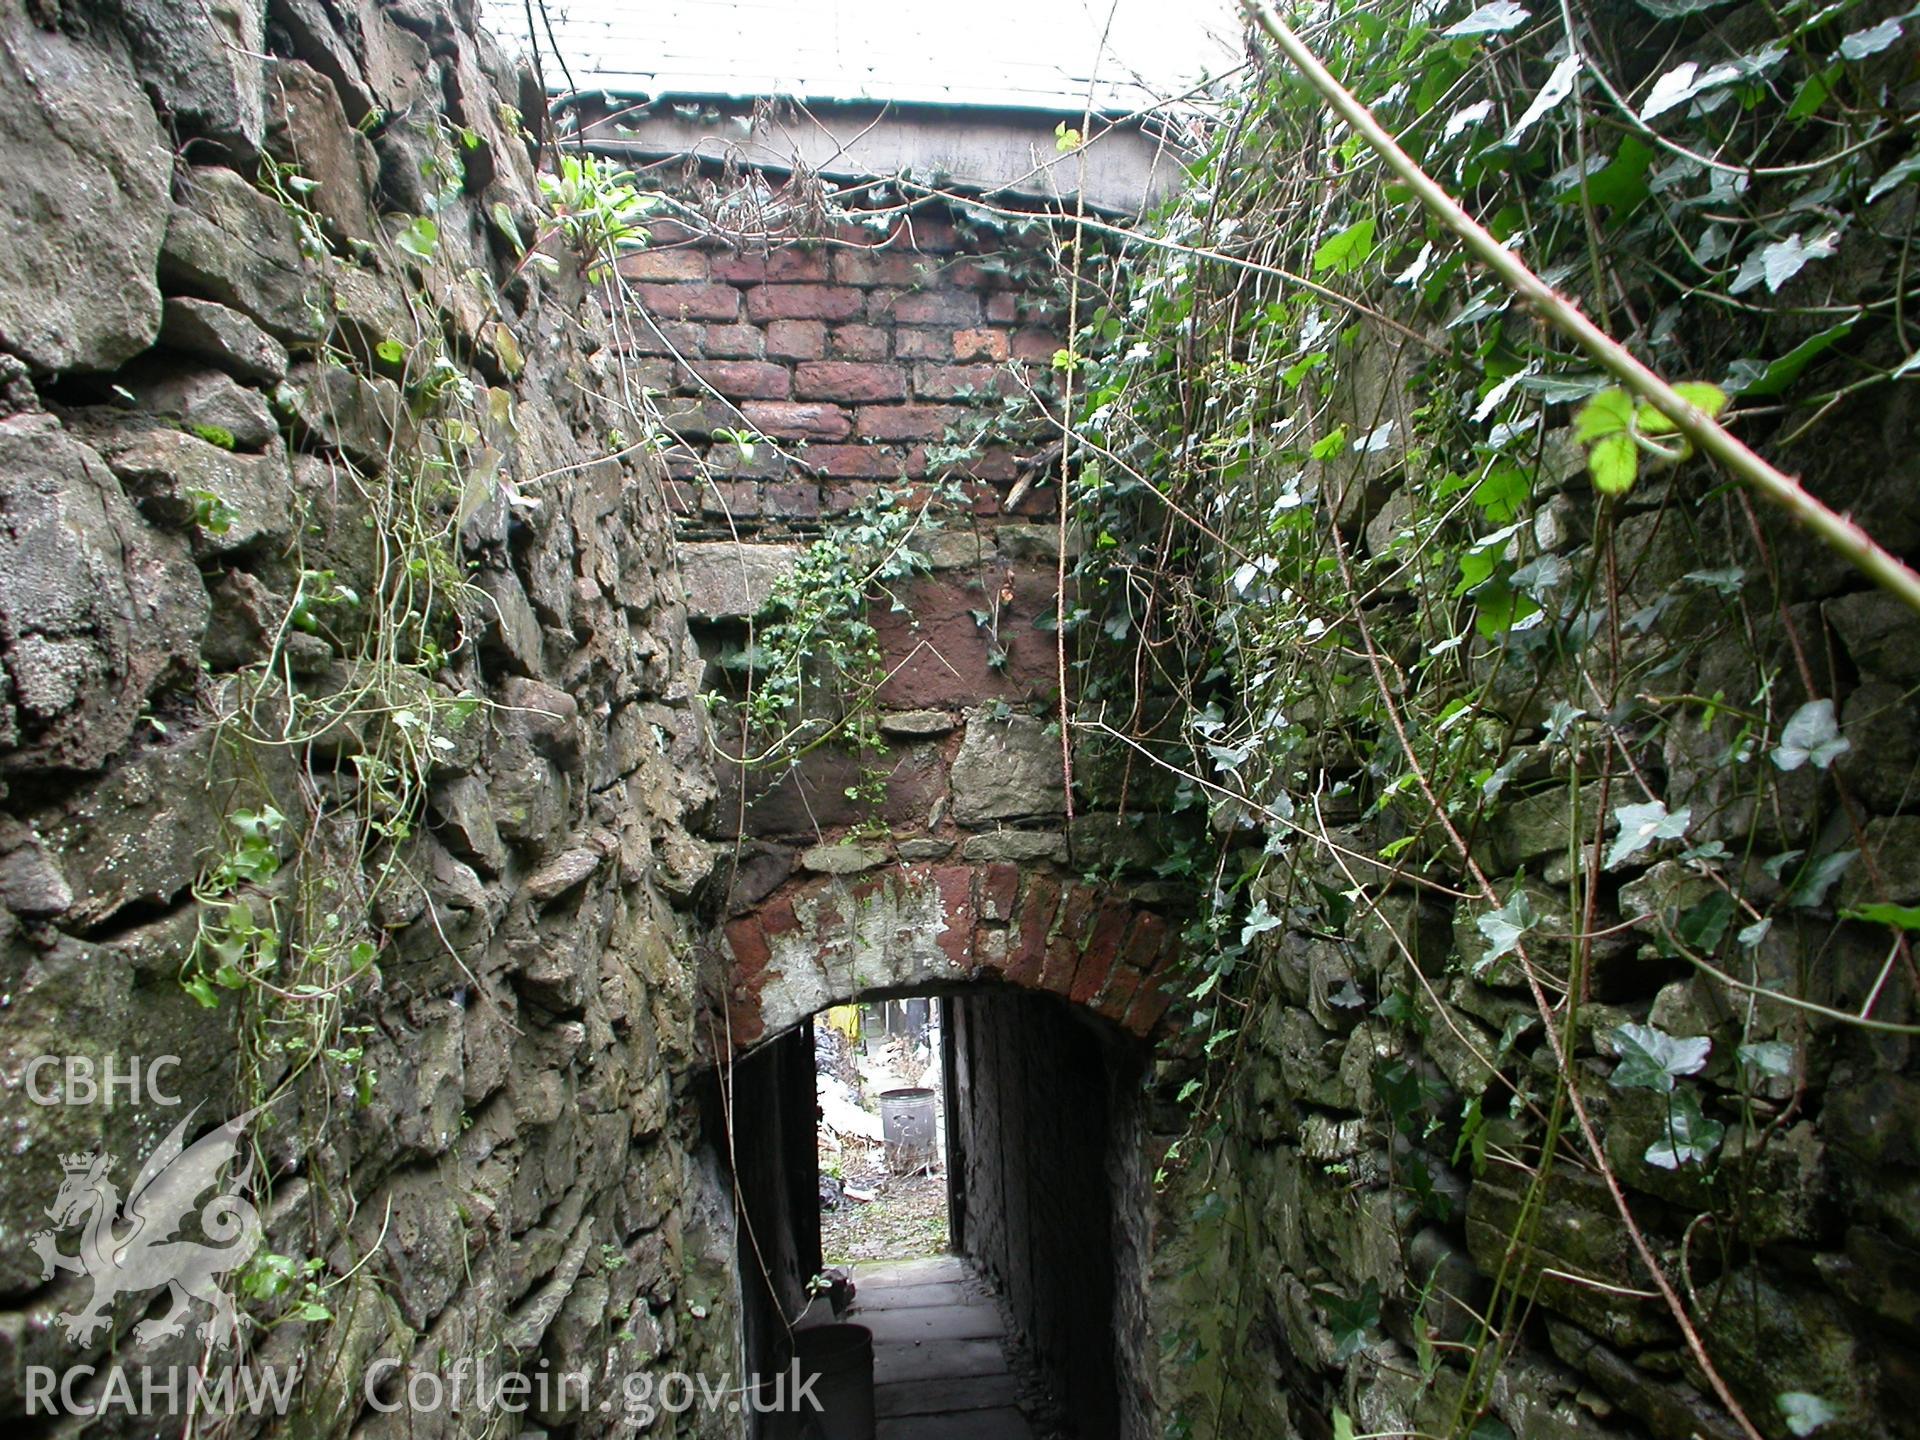 Rear garden entry to side-passage of bake-house.